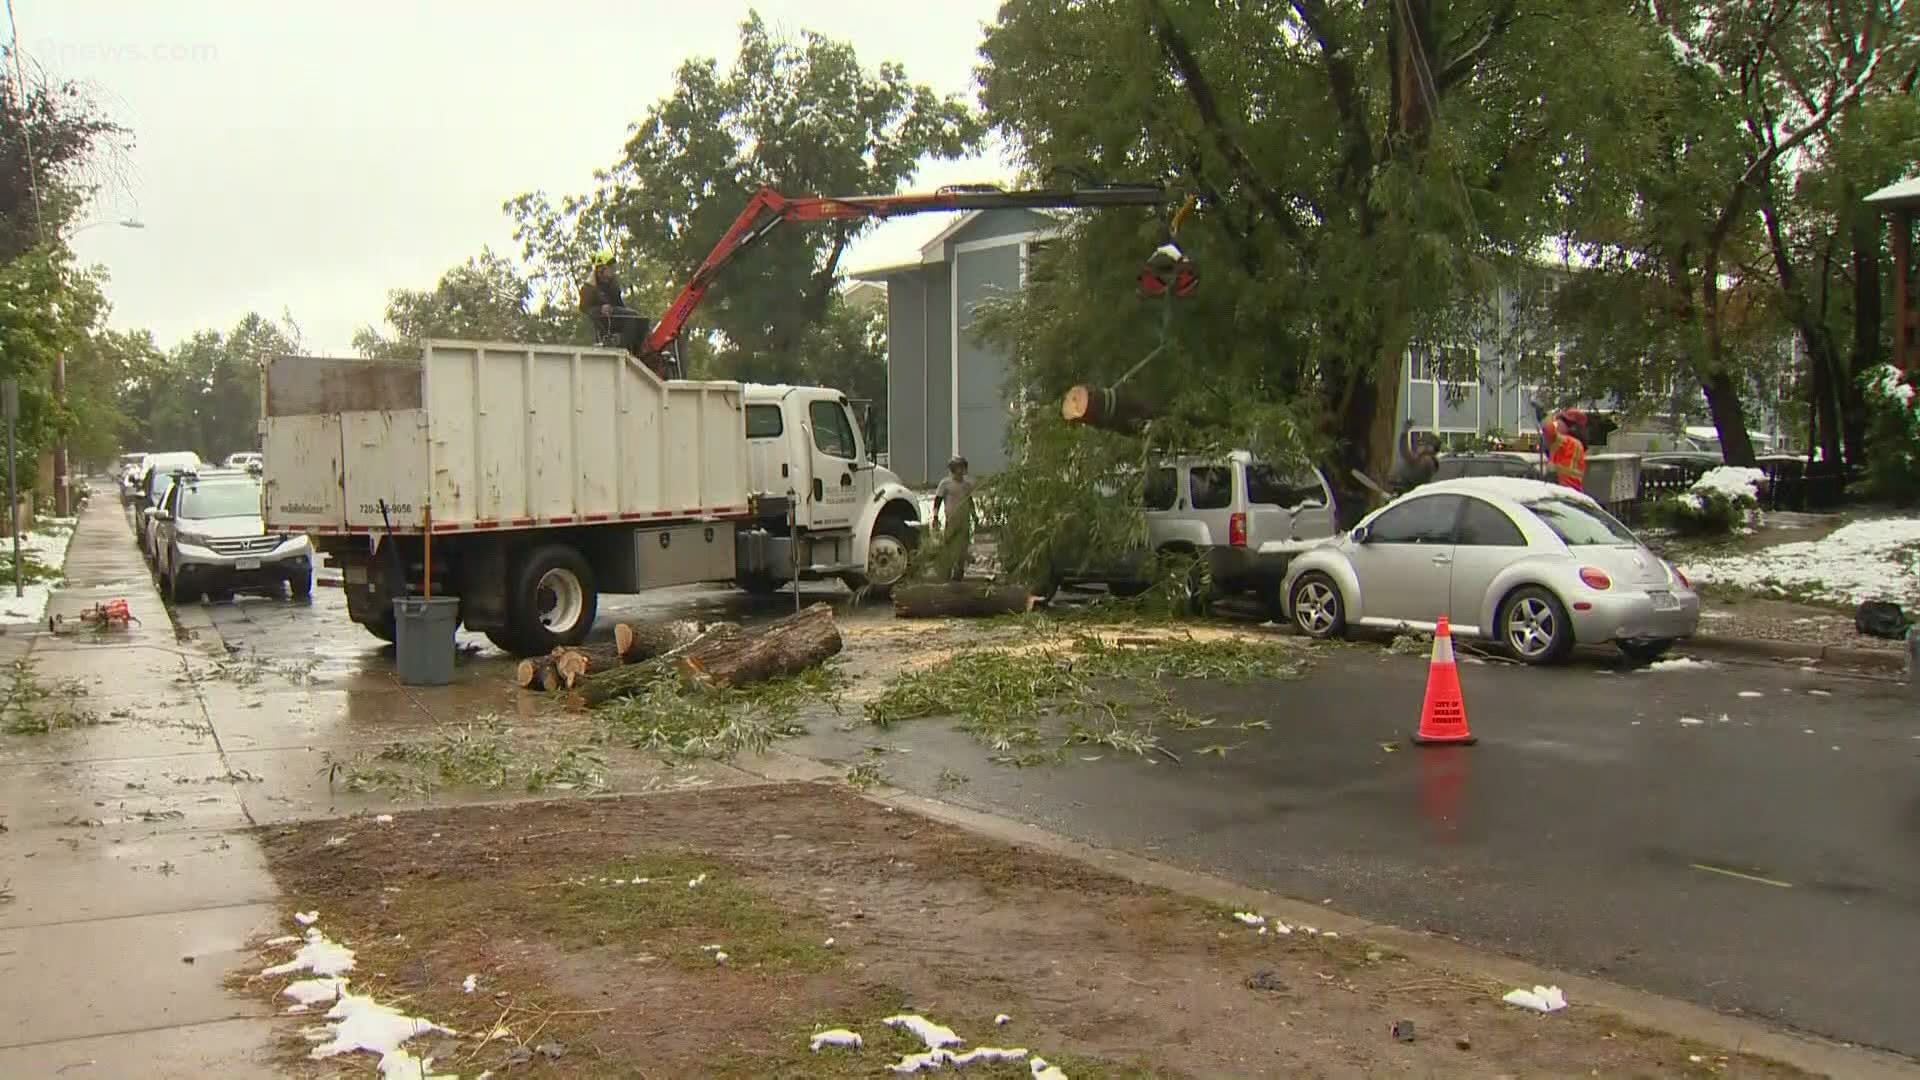 The scope of the damage in Boulder will be determined over the next week, with trees being cleared based on priority, city officials said.